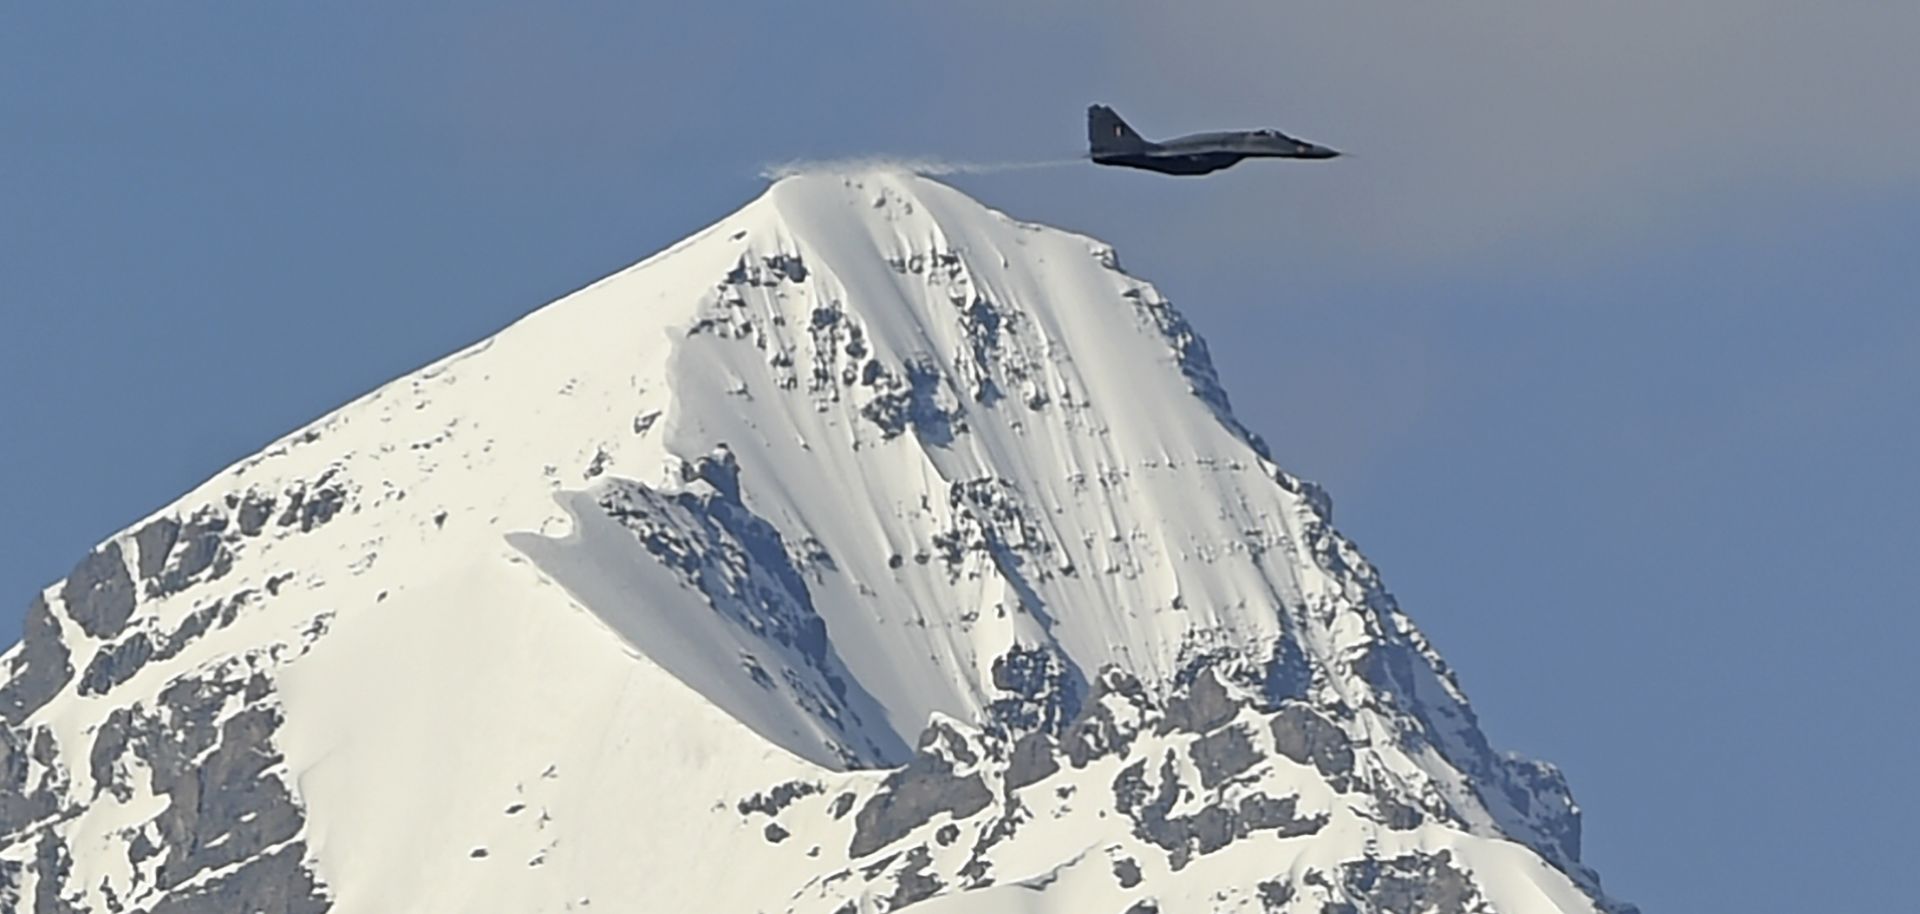 An Indian fighter jet flies over Ladakh, the disputed Himalayan region near the Chinese border, on June 26, 2020. 